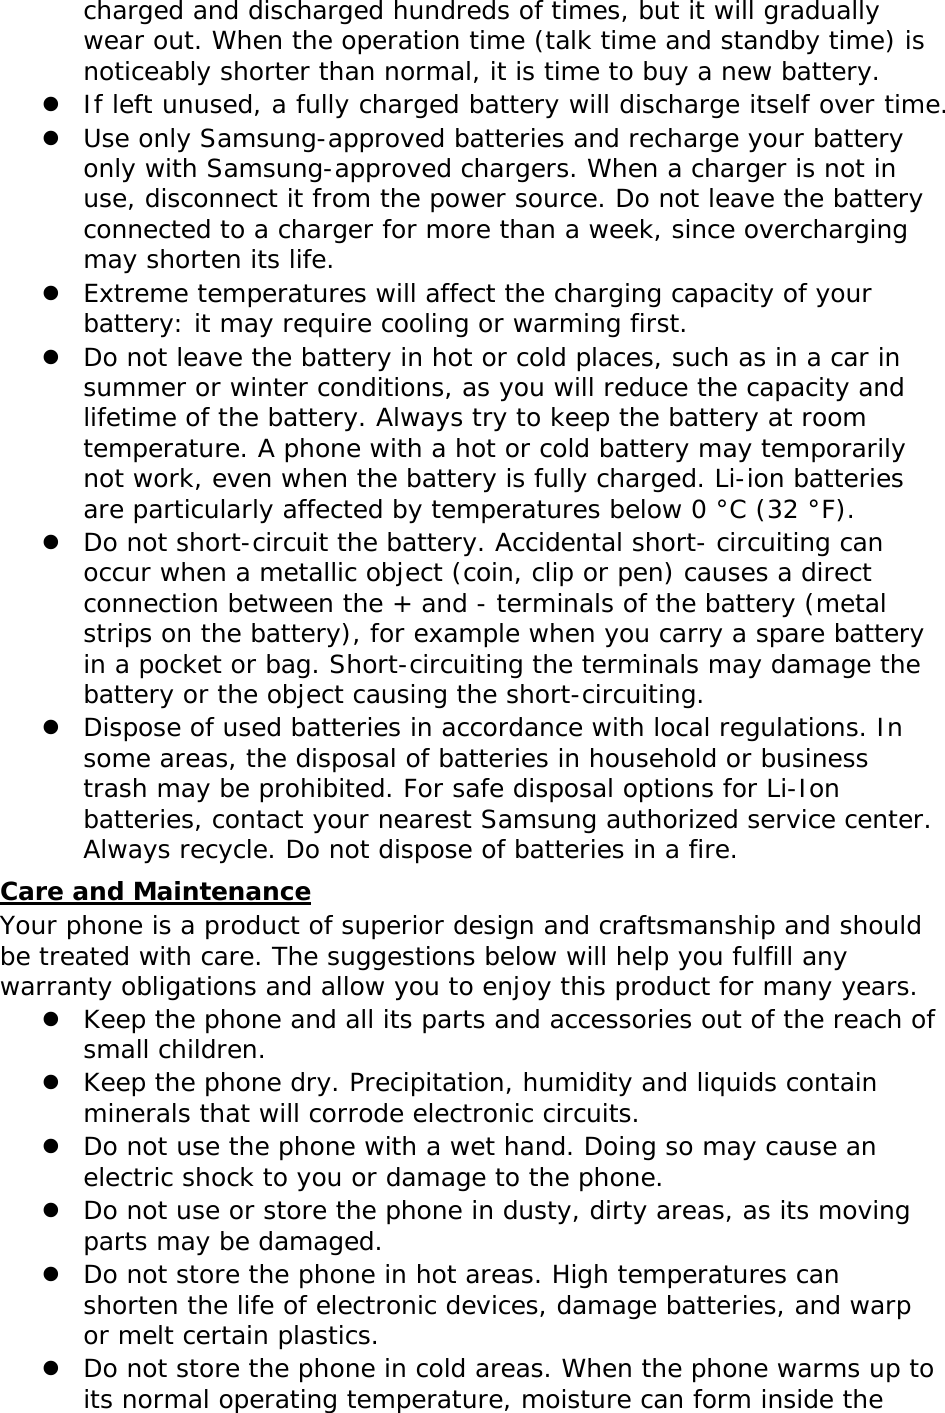 charged and discharged hundreds of times, but it will gradually wear out. When the operation time (talk time and standby time) is noticeably shorter than normal, it is time to buy a new battery.  If left unused, a fully charged battery will discharge itself over time.  Use only Samsung-approved batteries and recharge your battery only with Samsung-approved chargers. When a charger is not in use, disconnect it from the power source. Do not leave the battery connected to a charger for more than a week, since overcharging may shorten its life.  Extreme temperatures will affect the charging capacity of your battery: it may require cooling or warming first.  Do not leave the battery in hot or cold places, such as in a car in summer or winter conditions, as you will reduce the capacity and lifetime of the battery. Always try to keep the battery at room temperature. A phone with a hot or cold battery may temporarily not work, even when the battery is fully charged. Li-ion batteries are particularly affected by temperatures below 0 °C (32 °F).  Do not short-circuit the battery. Accidental short- circuiting can occur when a metallic object (coin, clip or pen) causes a direct connection between the + and - terminals of the battery (metal strips on the battery), for example when you carry a spare battery in a pocket or bag. Short-circuiting the terminals may damage the battery or the object causing the short-circuiting.  Dispose of used batteries in accordance with local regulations. In some areas, the disposal of batteries in household or business trash may be prohibited. For safe disposal options for Li-Ion batteries, contact your nearest Samsung authorized service center. Always recycle. Do not dispose of batteries in a fire. Care and Maintenance Your phone is a product of superior design and craftsmanship and should be treated with care. The suggestions below will help you fulfill any warranty obligations and allow you to enjoy this product for many years.  Keep the phone and all its parts and accessories out of the reach of small children.  Keep the phone dry. Precipitation, humidity and liquids contain minerals that will corrode electronic circuits.  Do not use the phone with a wet hand. Doing so may cause an electric shock to you or damage to the phone.  Do not use or store the phone in dusty, dirty areas, as its moving parts may be damaged.  Do not store the phone in hot areas. High temperatures can shorten the life of electronic devices, damage batteries, and warp or melt certain plastics.  Do not store the phone in cold areas. When the phone warms up to its normal operating temperature, moisture can form inside the 